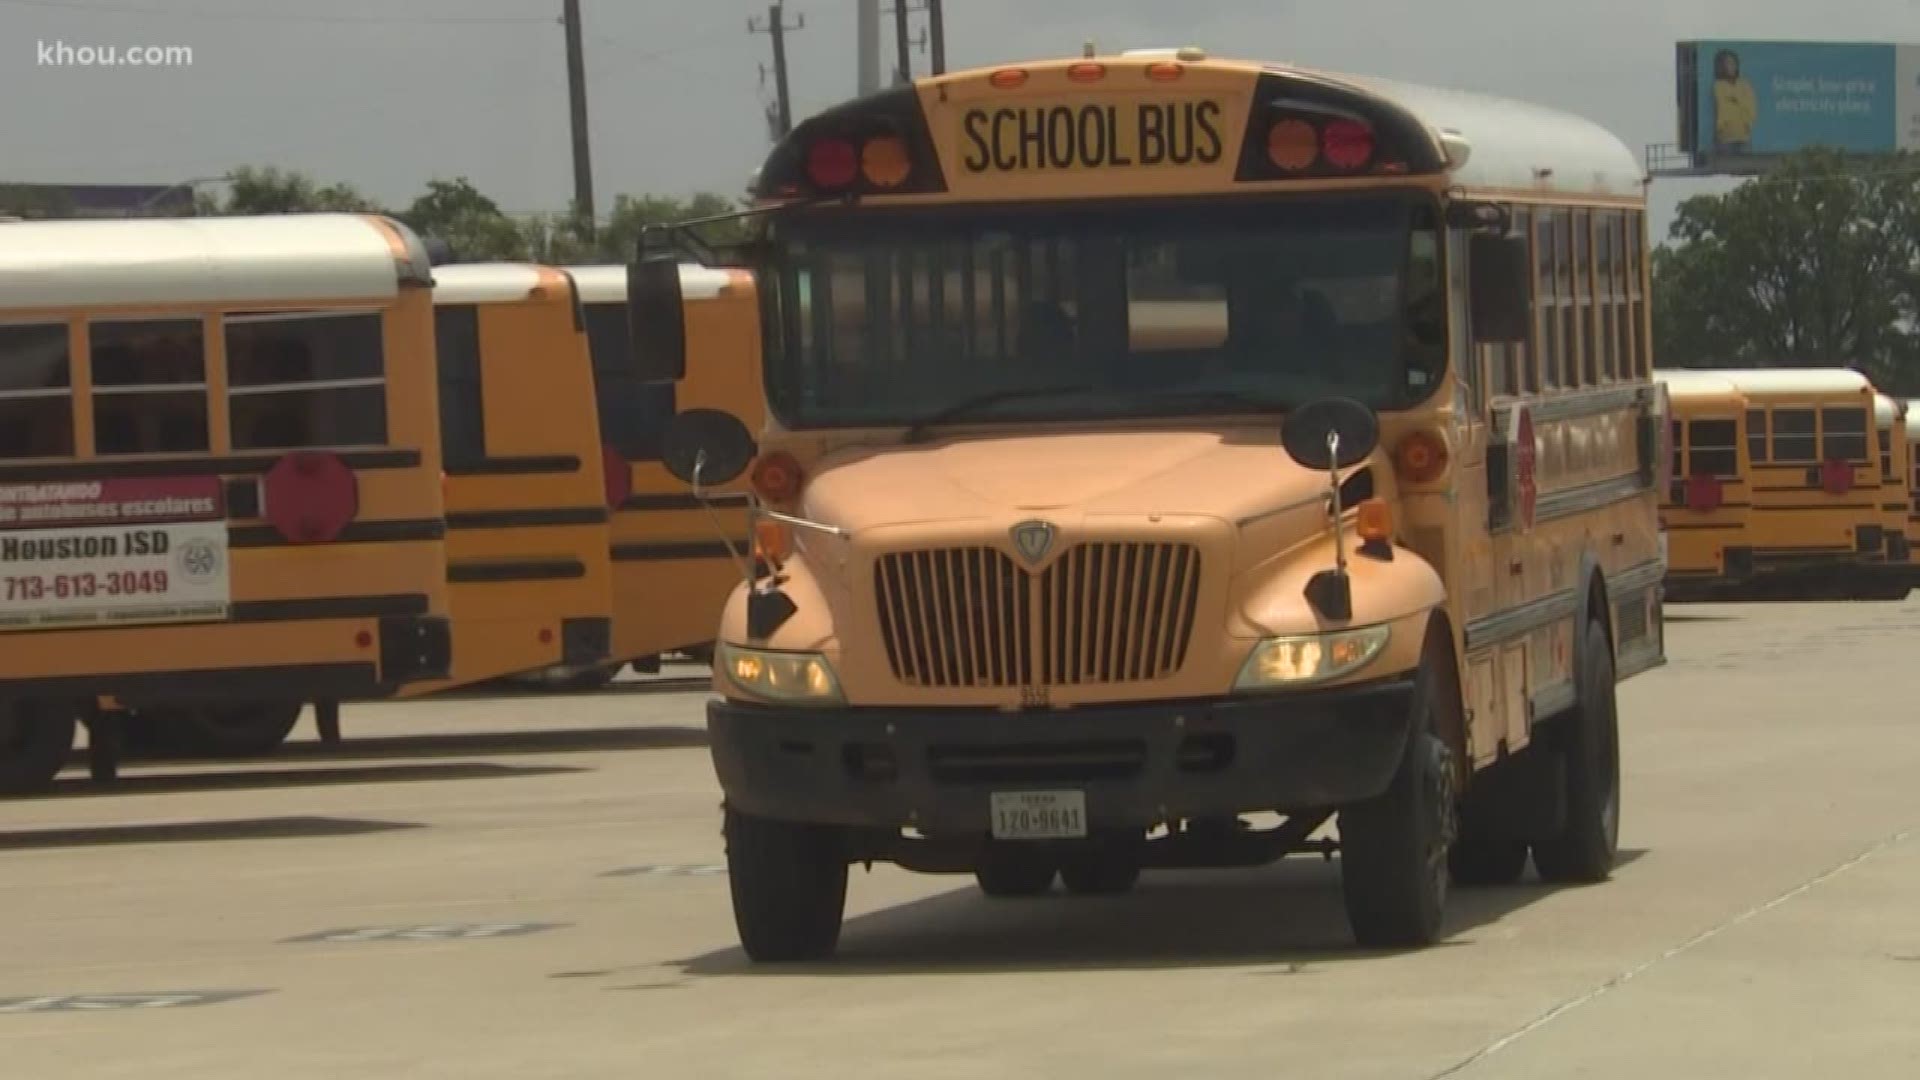 HISD hopes new tools cut back on transportation issues in the coming